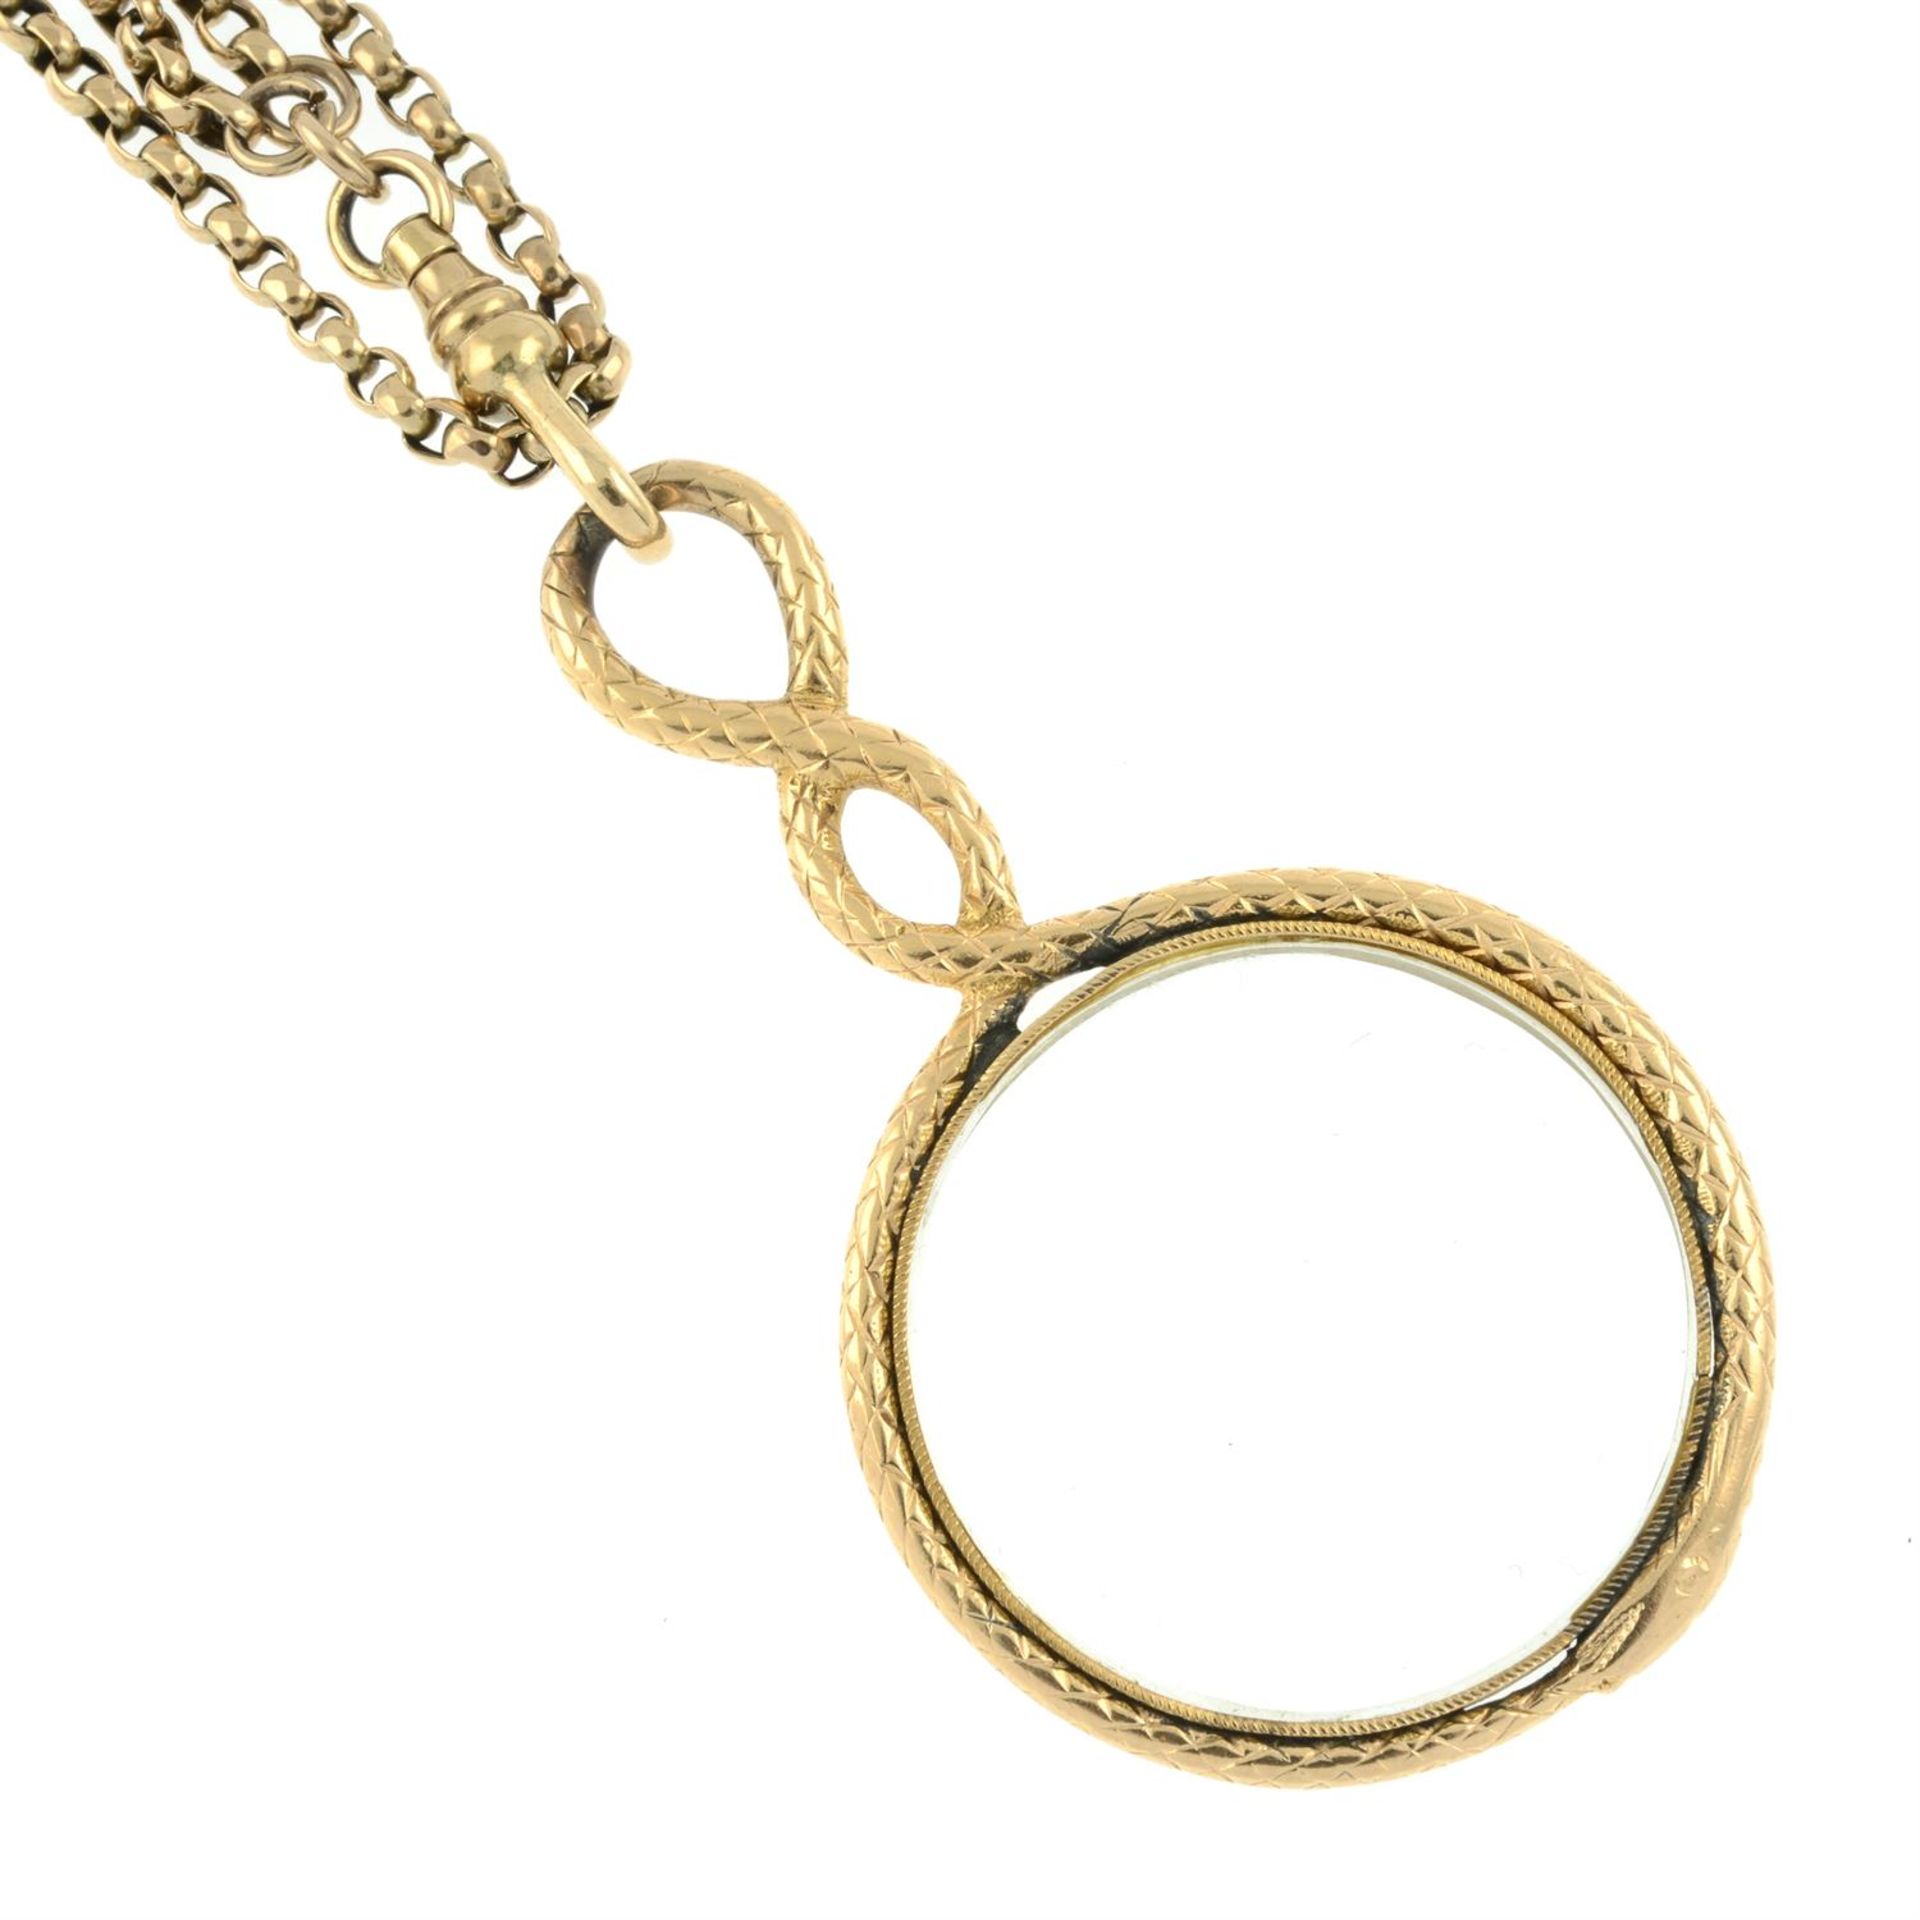 A late Georgian 15ct gold ouroboros snake magnifying glass, with late 19th century long guard chain. - Image 4 of 4